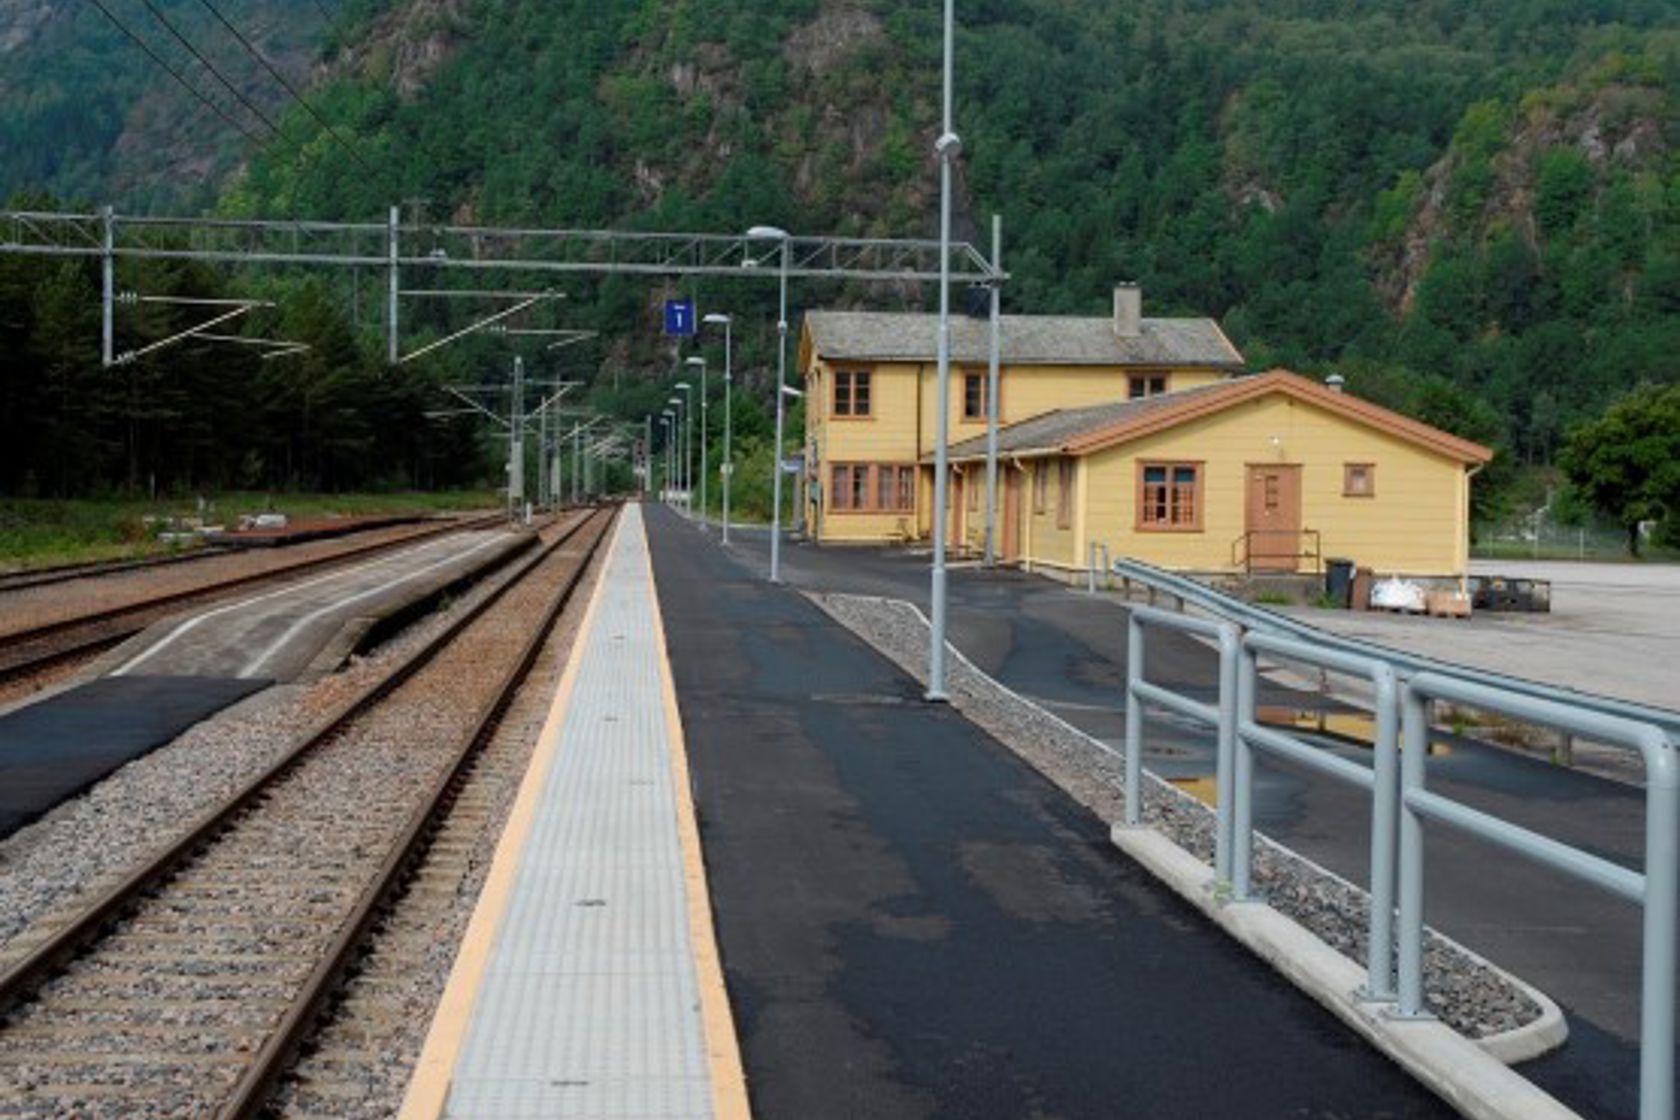 Exterior view of Snartemo station